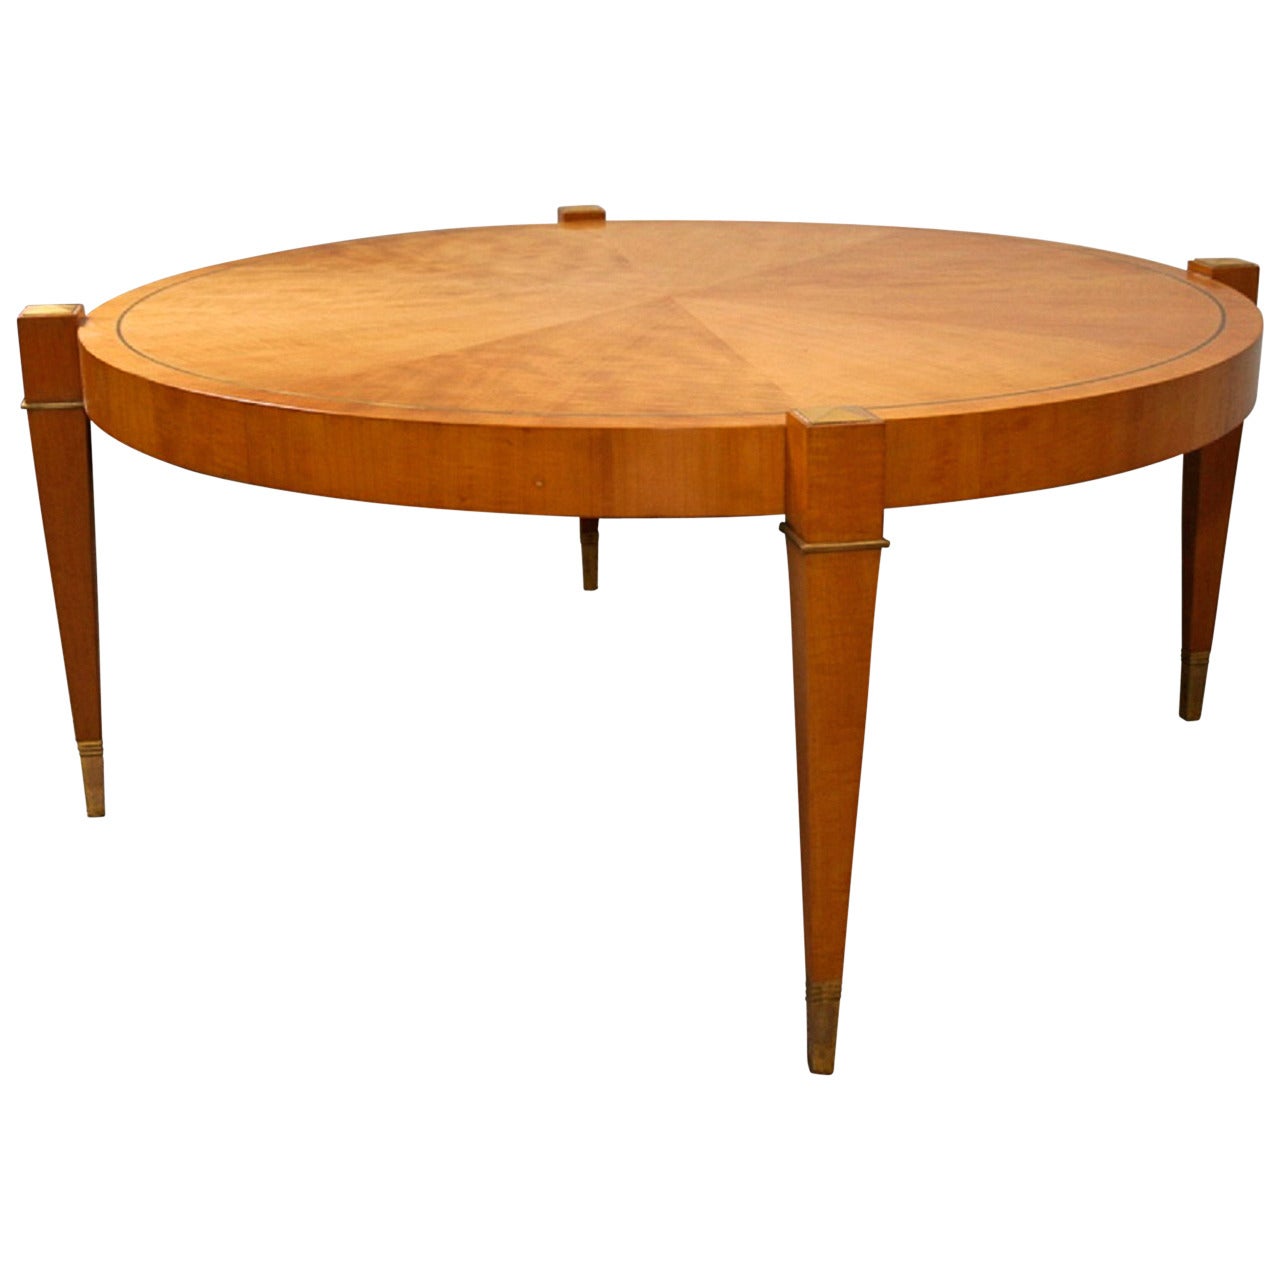 Custom-Made Low Coffee Table by Albano, American, 1950s